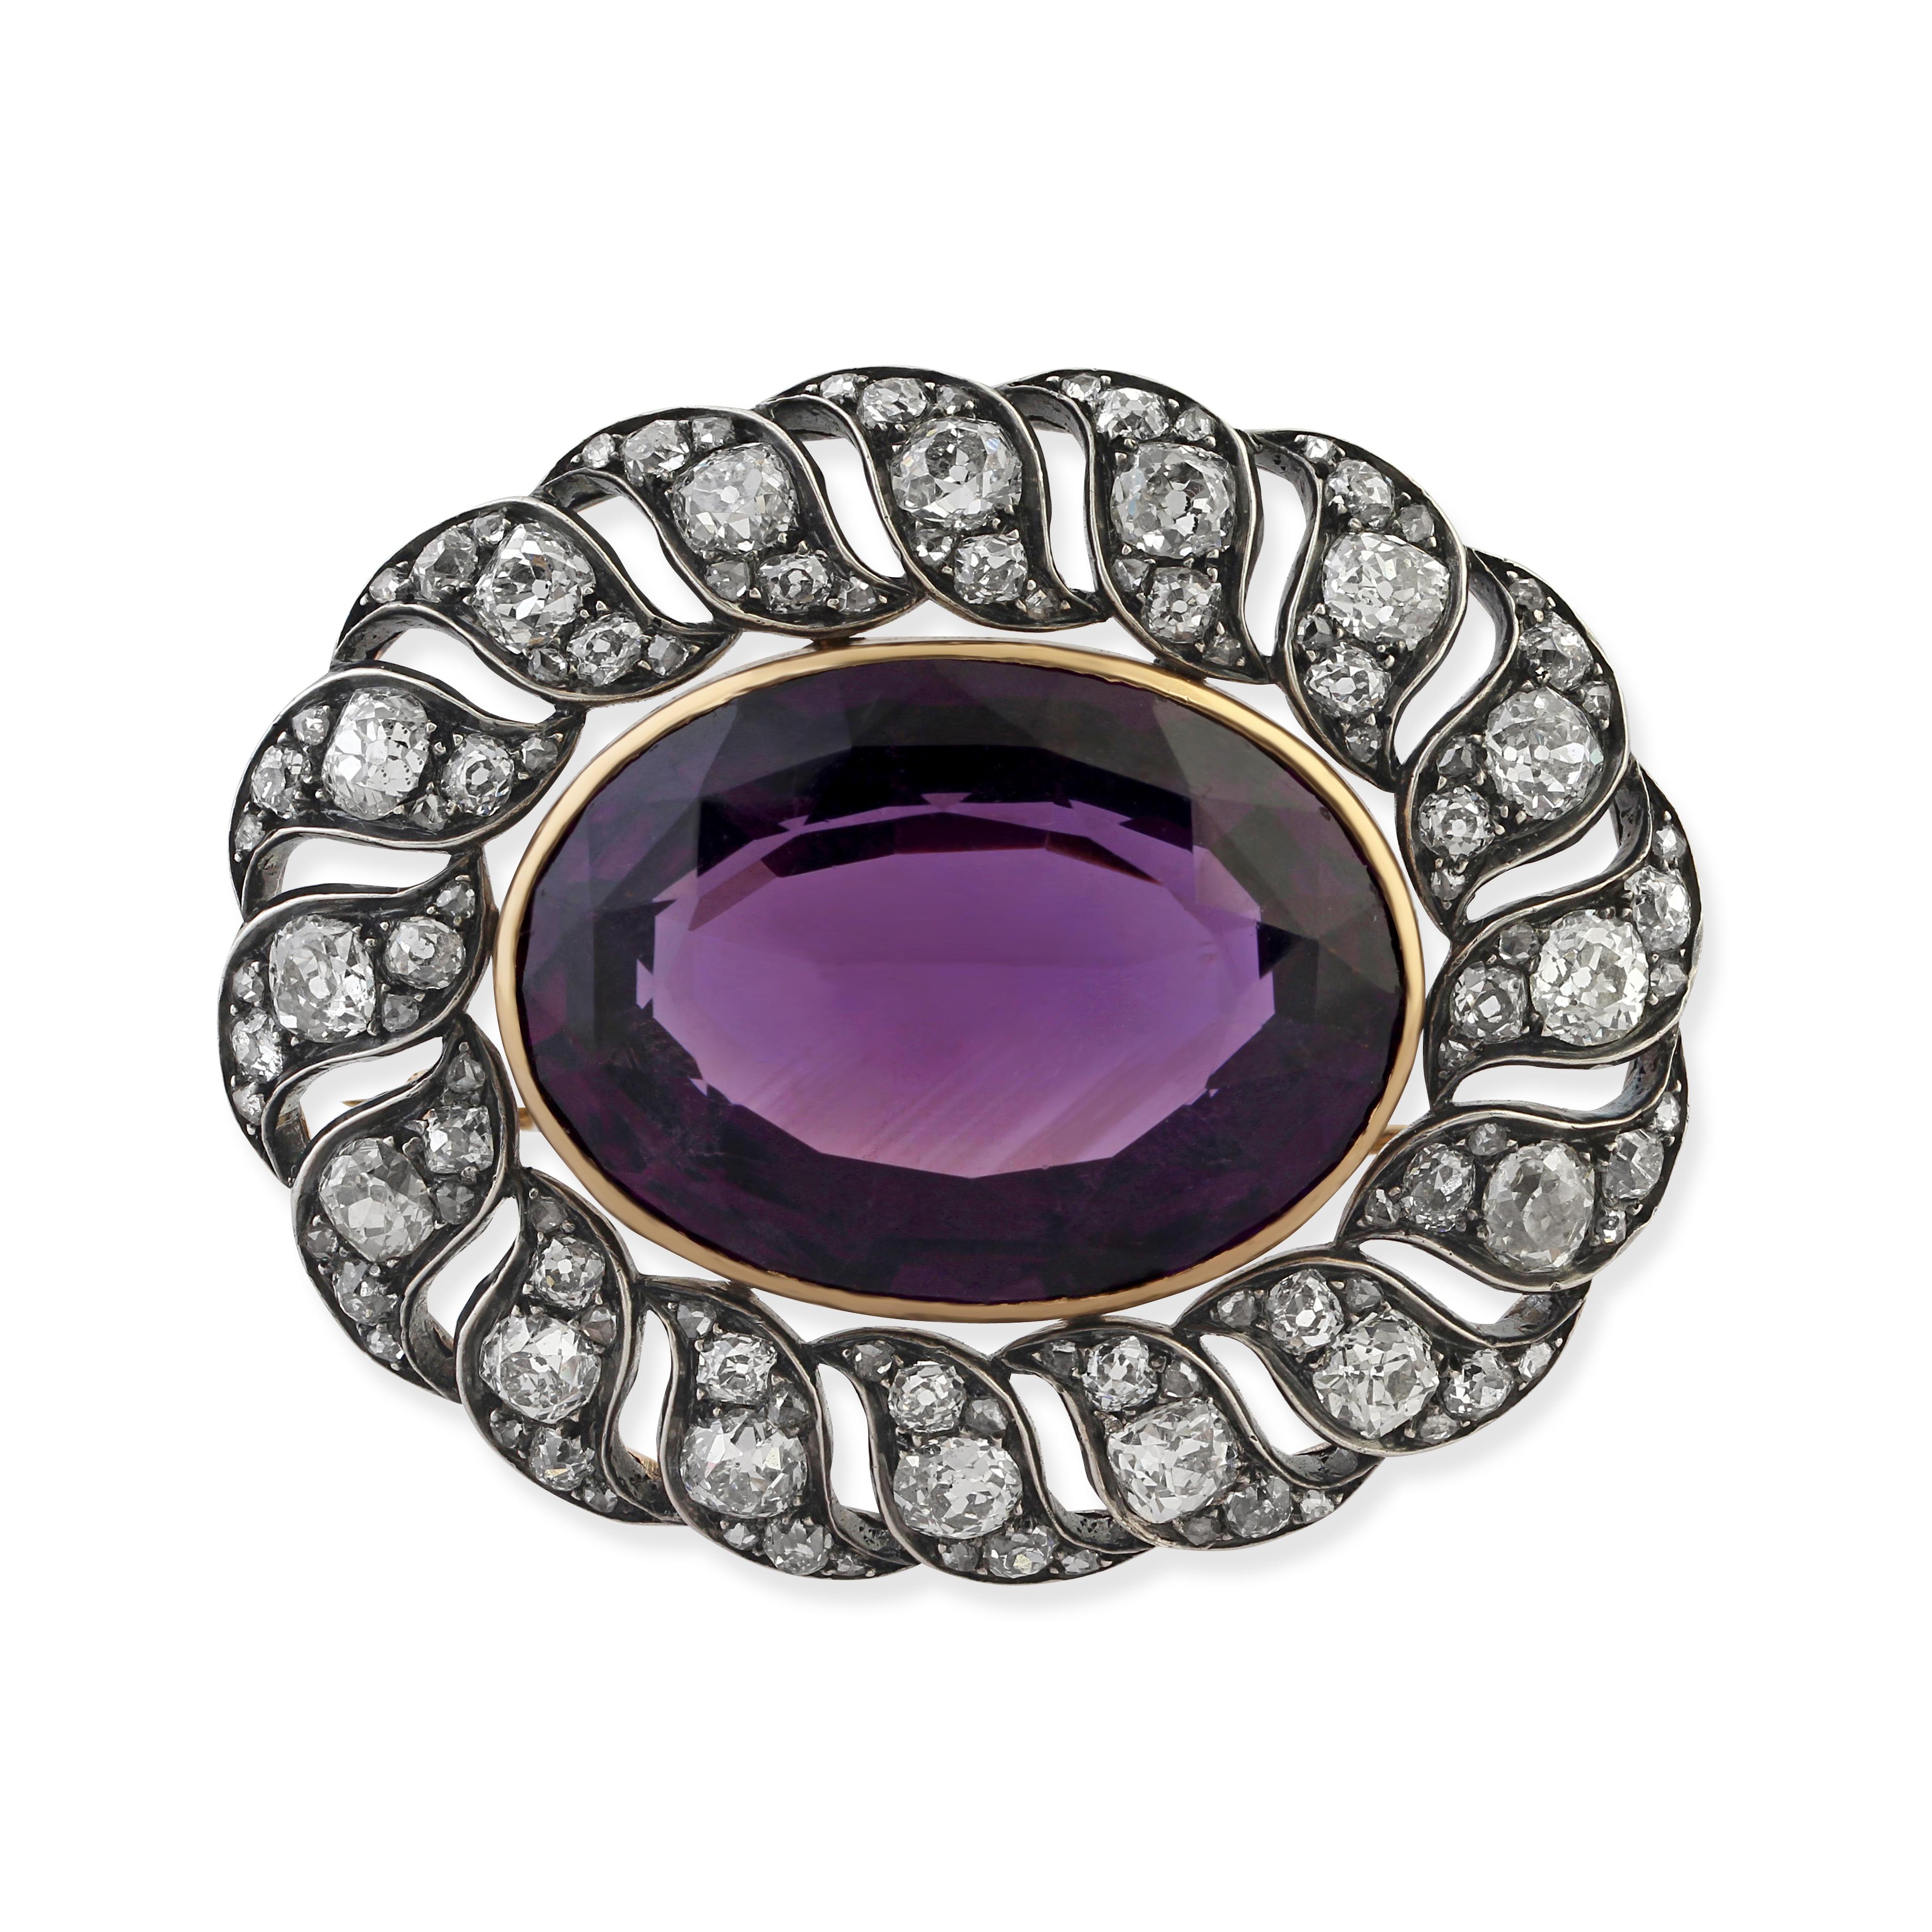 An antique silver on gold, amethyst and diamond brooch. Set with an oval cut amethyst in an openwork mount of old cushion-cut diamonds. Total diamond weight = apx 5.25cts. Circa 1850s.